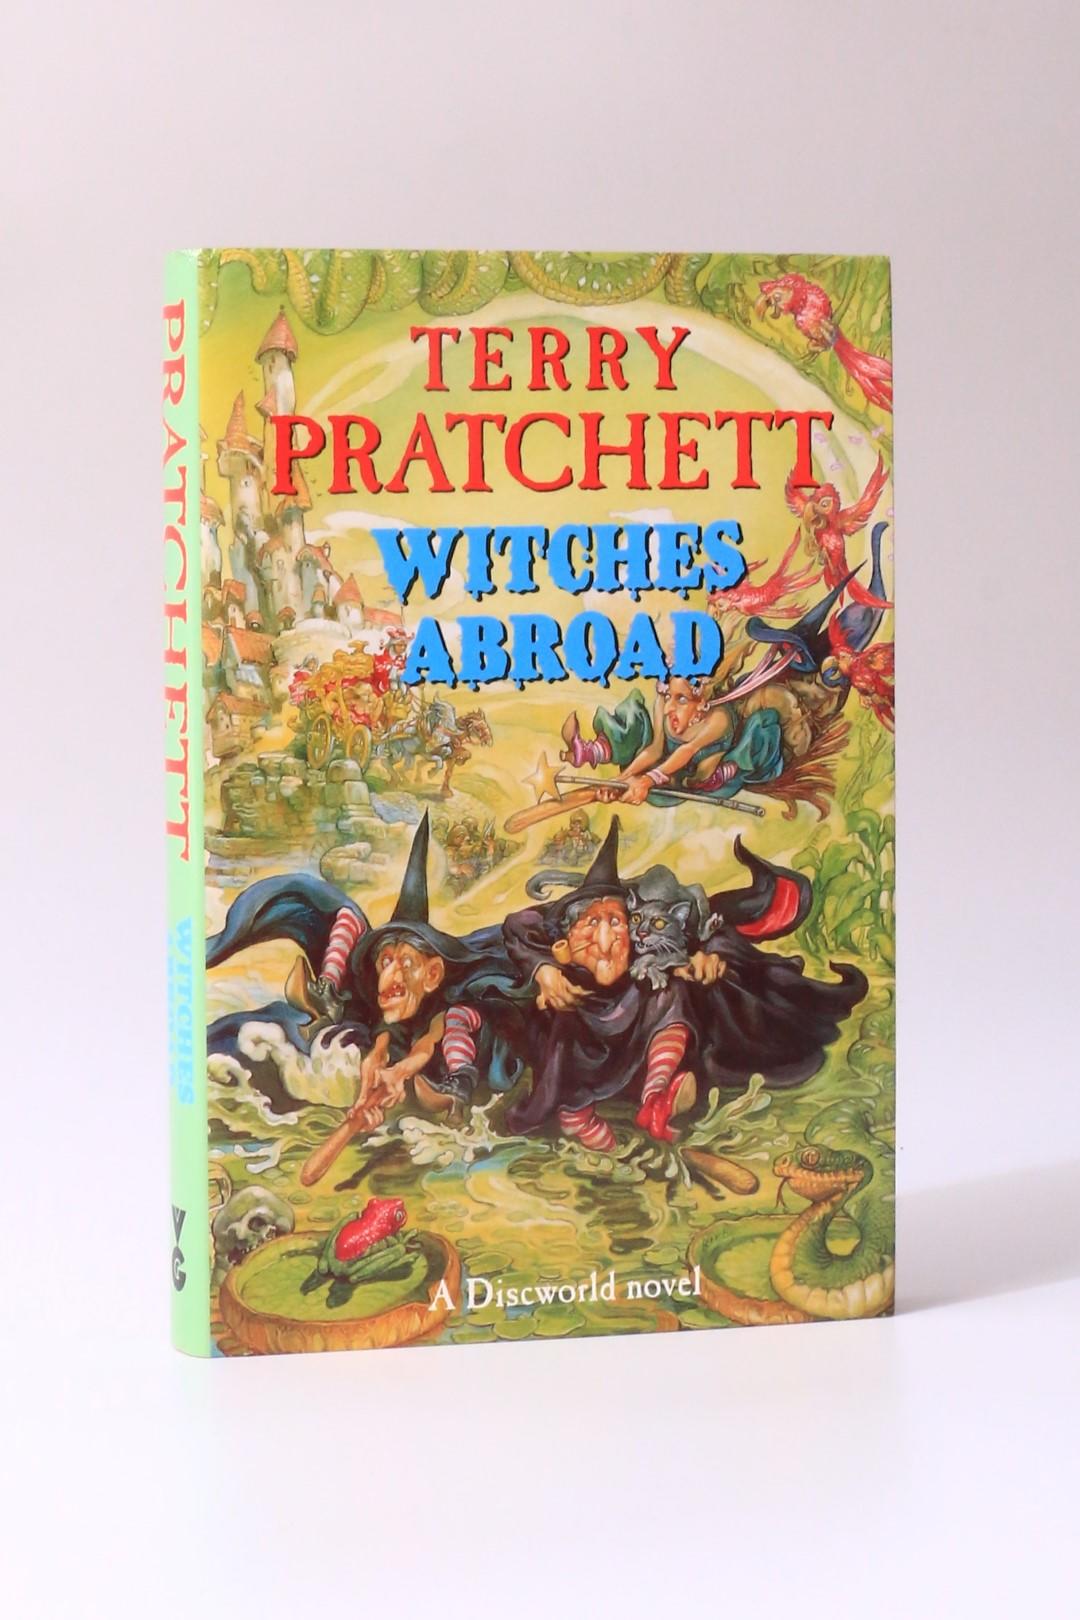 Terry Pratchett - Witches Abroad - Gollancz, 1991, First Edition.